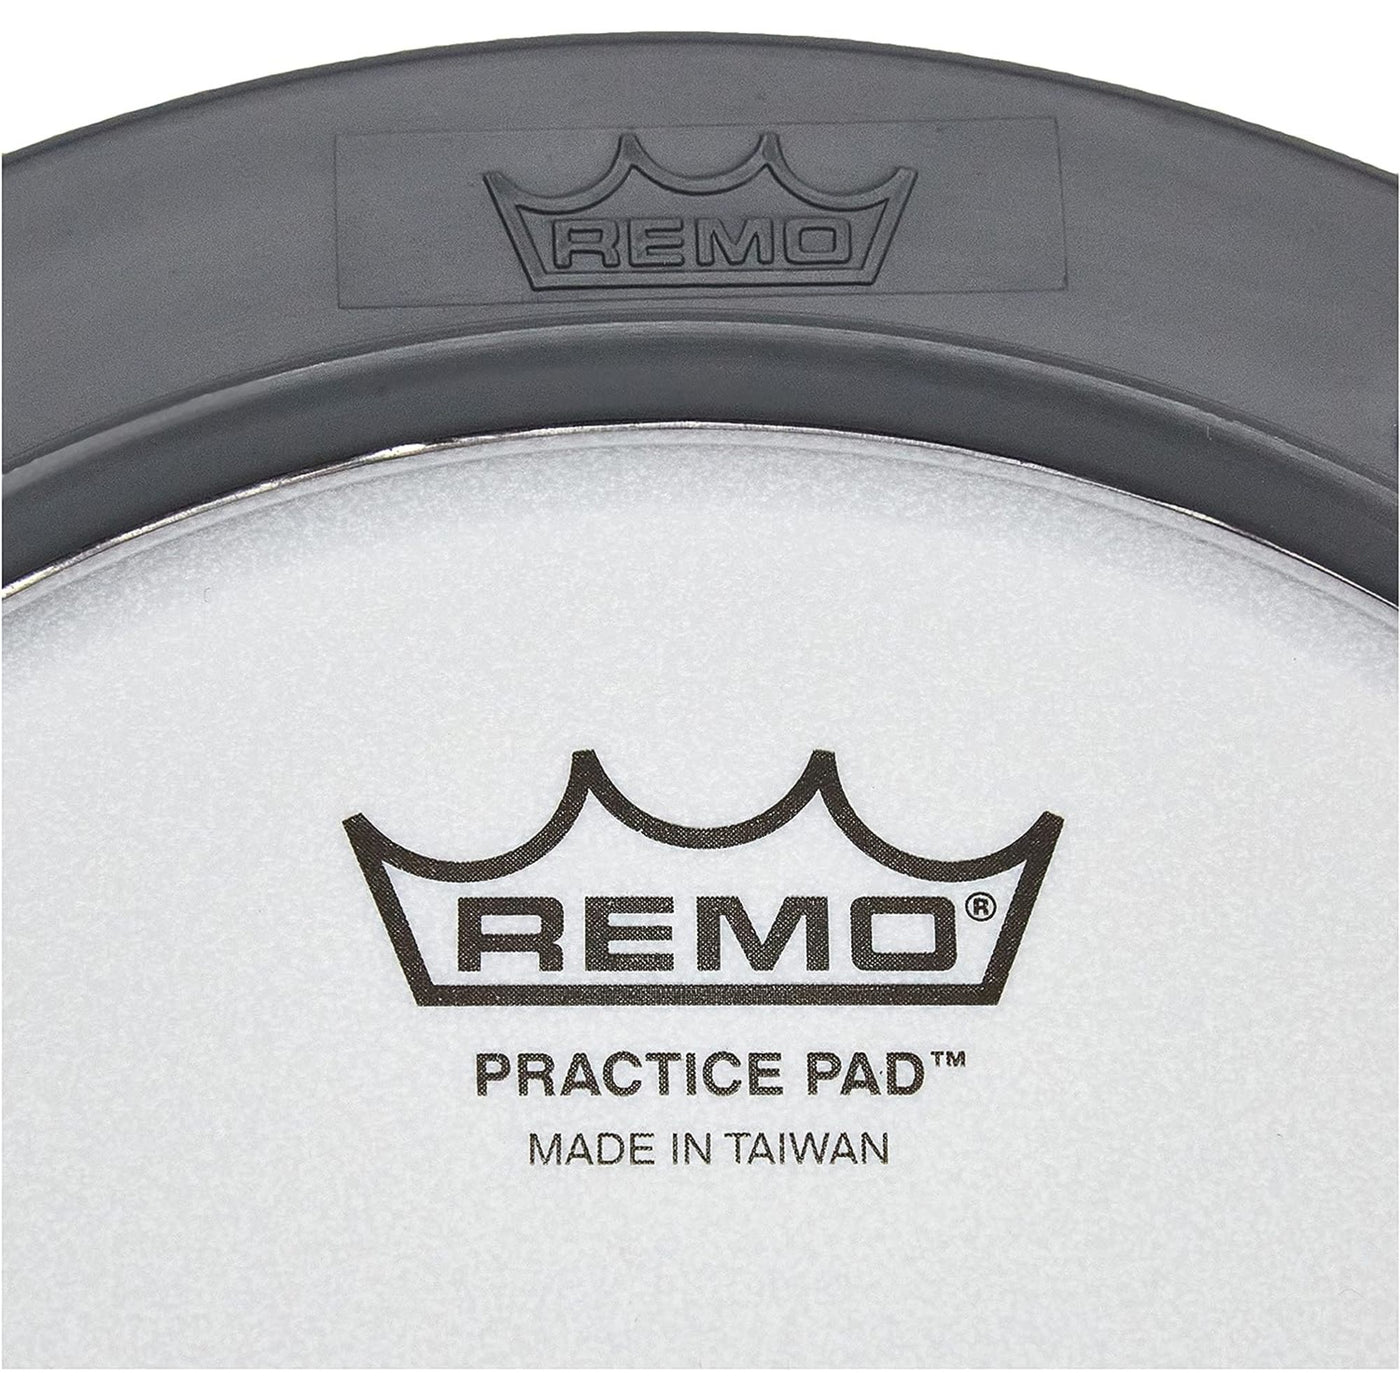 Remo RT-0006-00 Practice Pad - 6" Dia, Gray, Coated